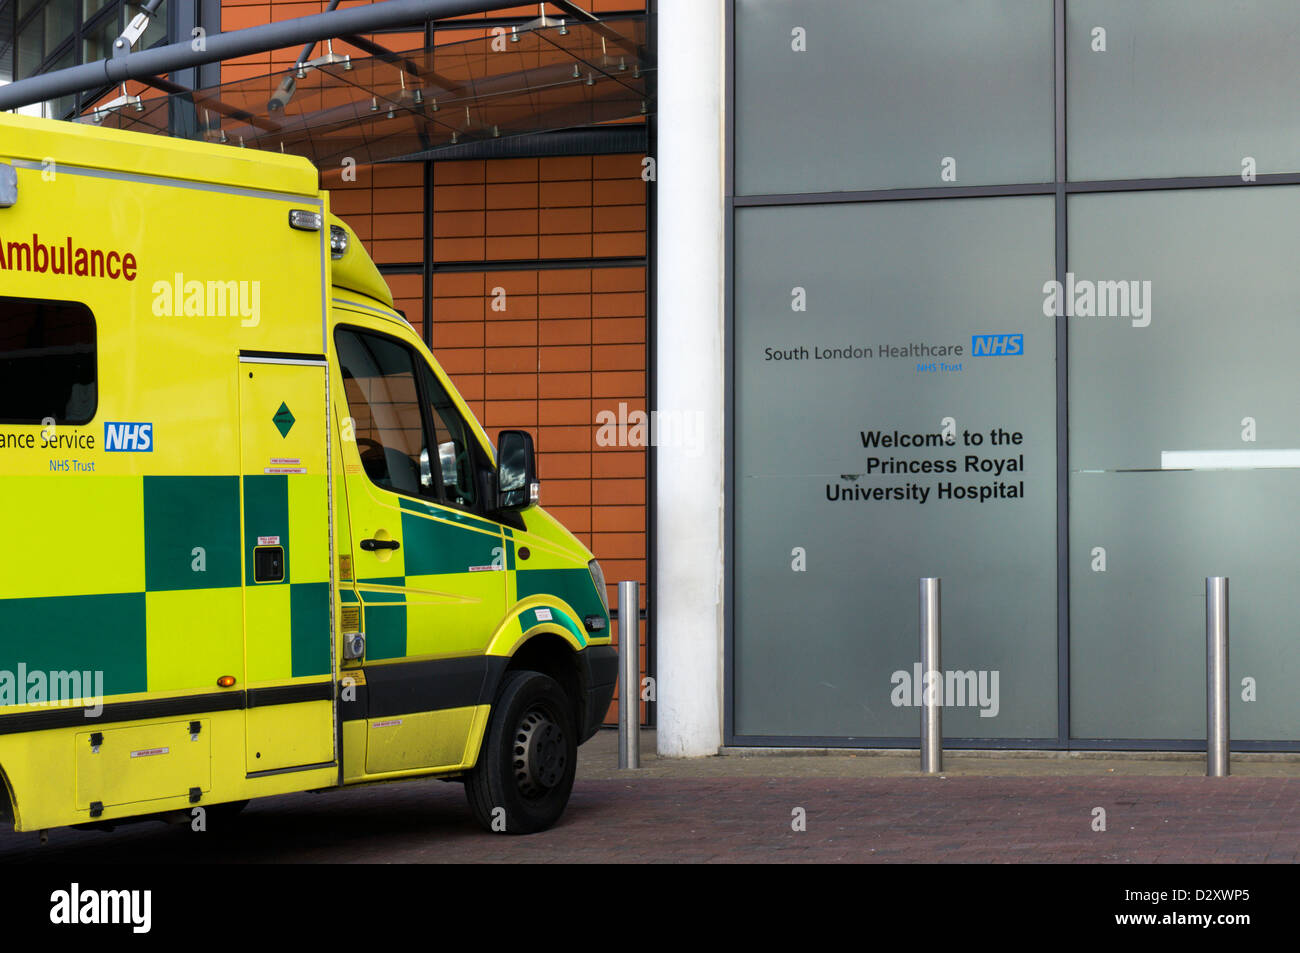 Ambulance outside the A&E Department of the Princess Royal University Hospital, part of the South London Healthcare NHS Trust. Stock Photo